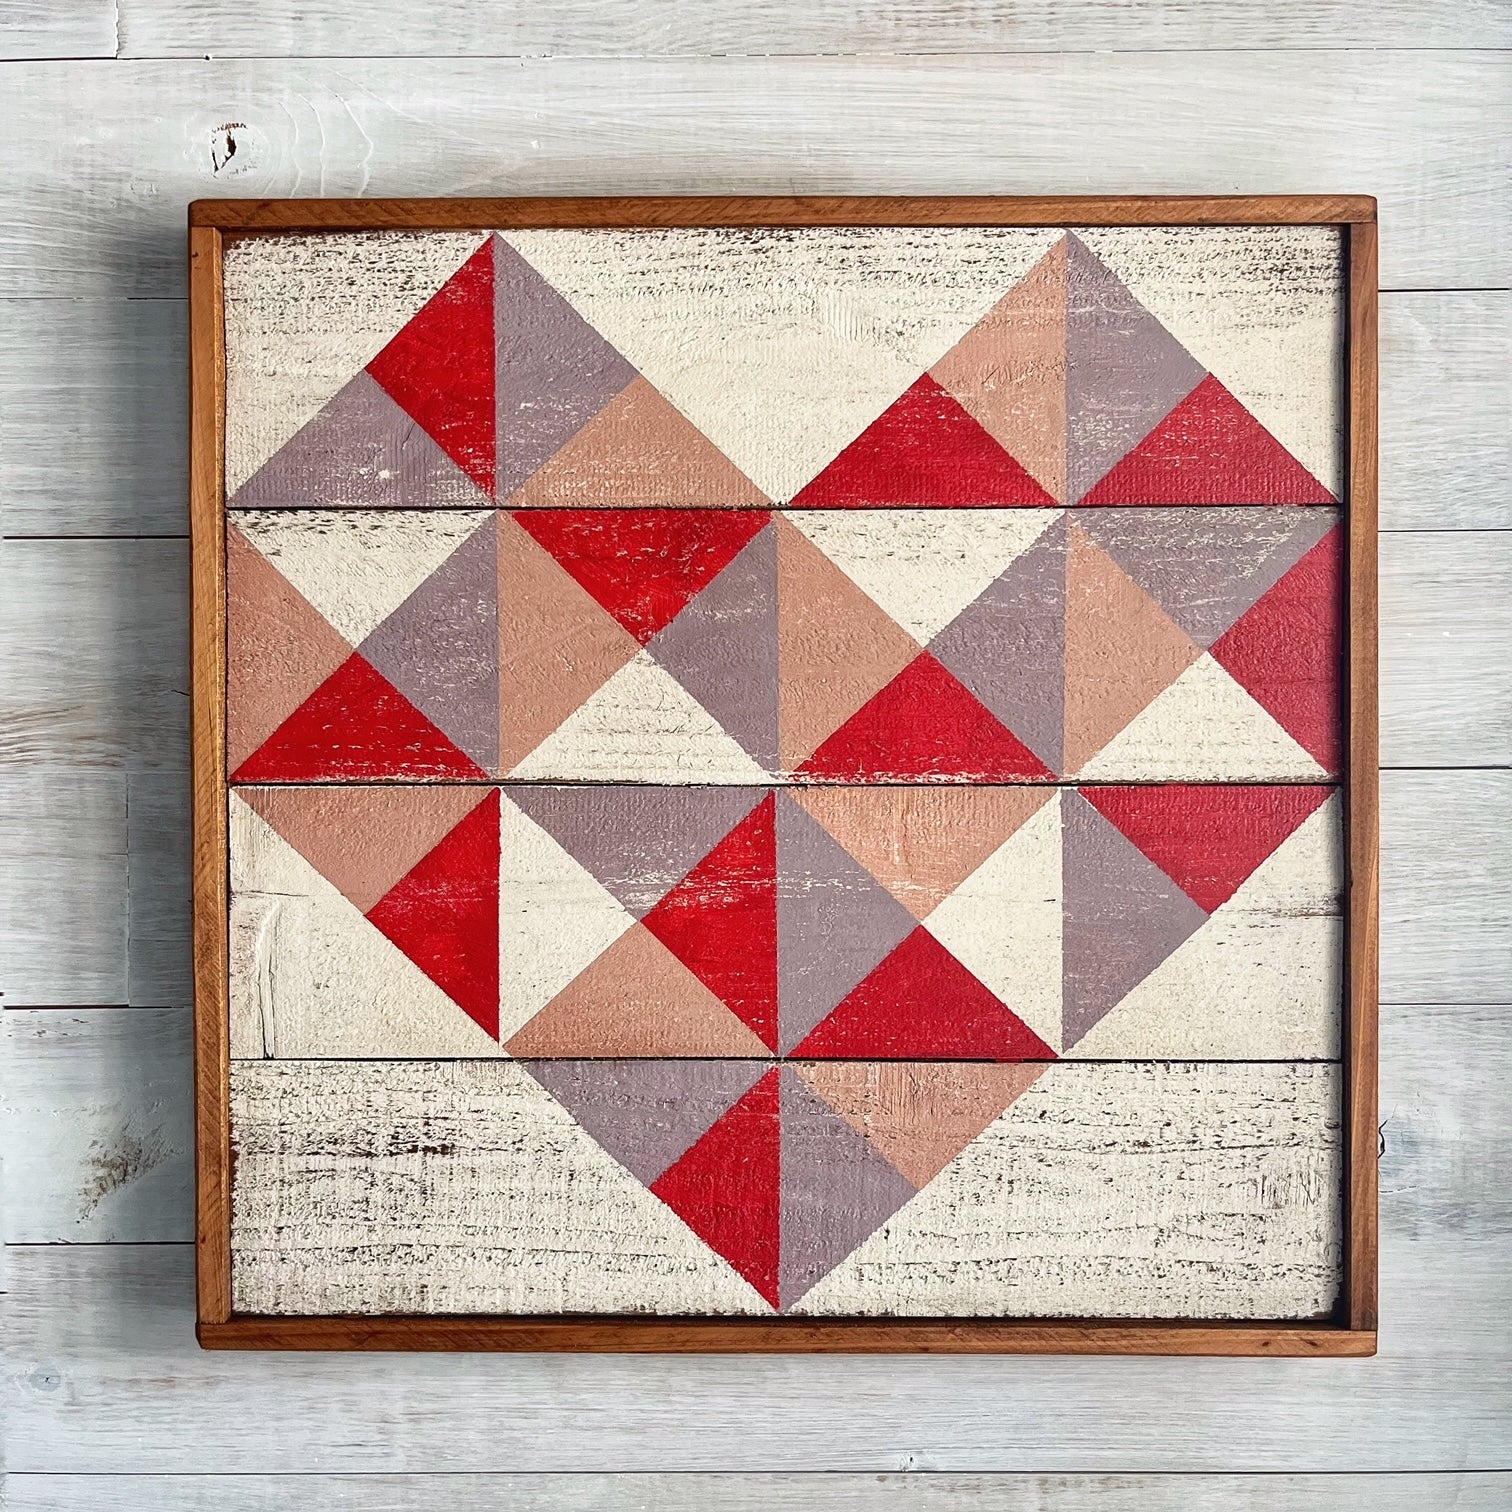 Little Pieces of My Heart Barn Quilt Kit